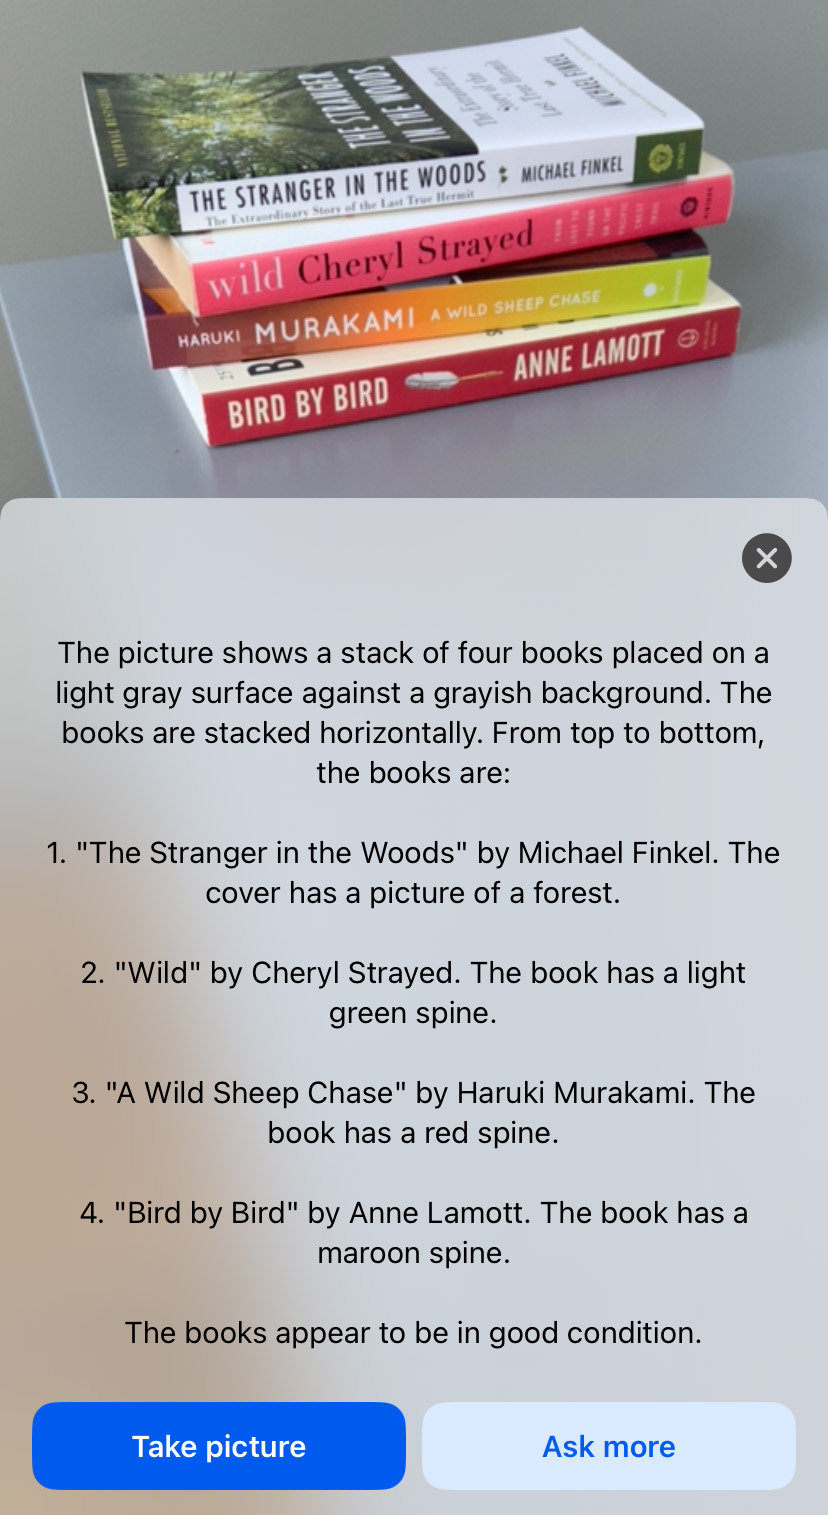 A screenshot of a stack of four books with an image description beneath them. The picture shows a stack of four books placed on a light gray surface against a grayish background. The books are stacked horizontally. From top to bottom, the books are: 1. The Stranger in the Woods by Michael Finkel. The cover has a picture of a forest. 2. Wild by Cheryl Strayed. The book has a light green spine. 3. A Wild Sheep Chase by Haruki Murakami. The book has a red spine. 4. Bird by Bird by Anne Lamott. The book has a maroon spine. The books appear to be in good condition.